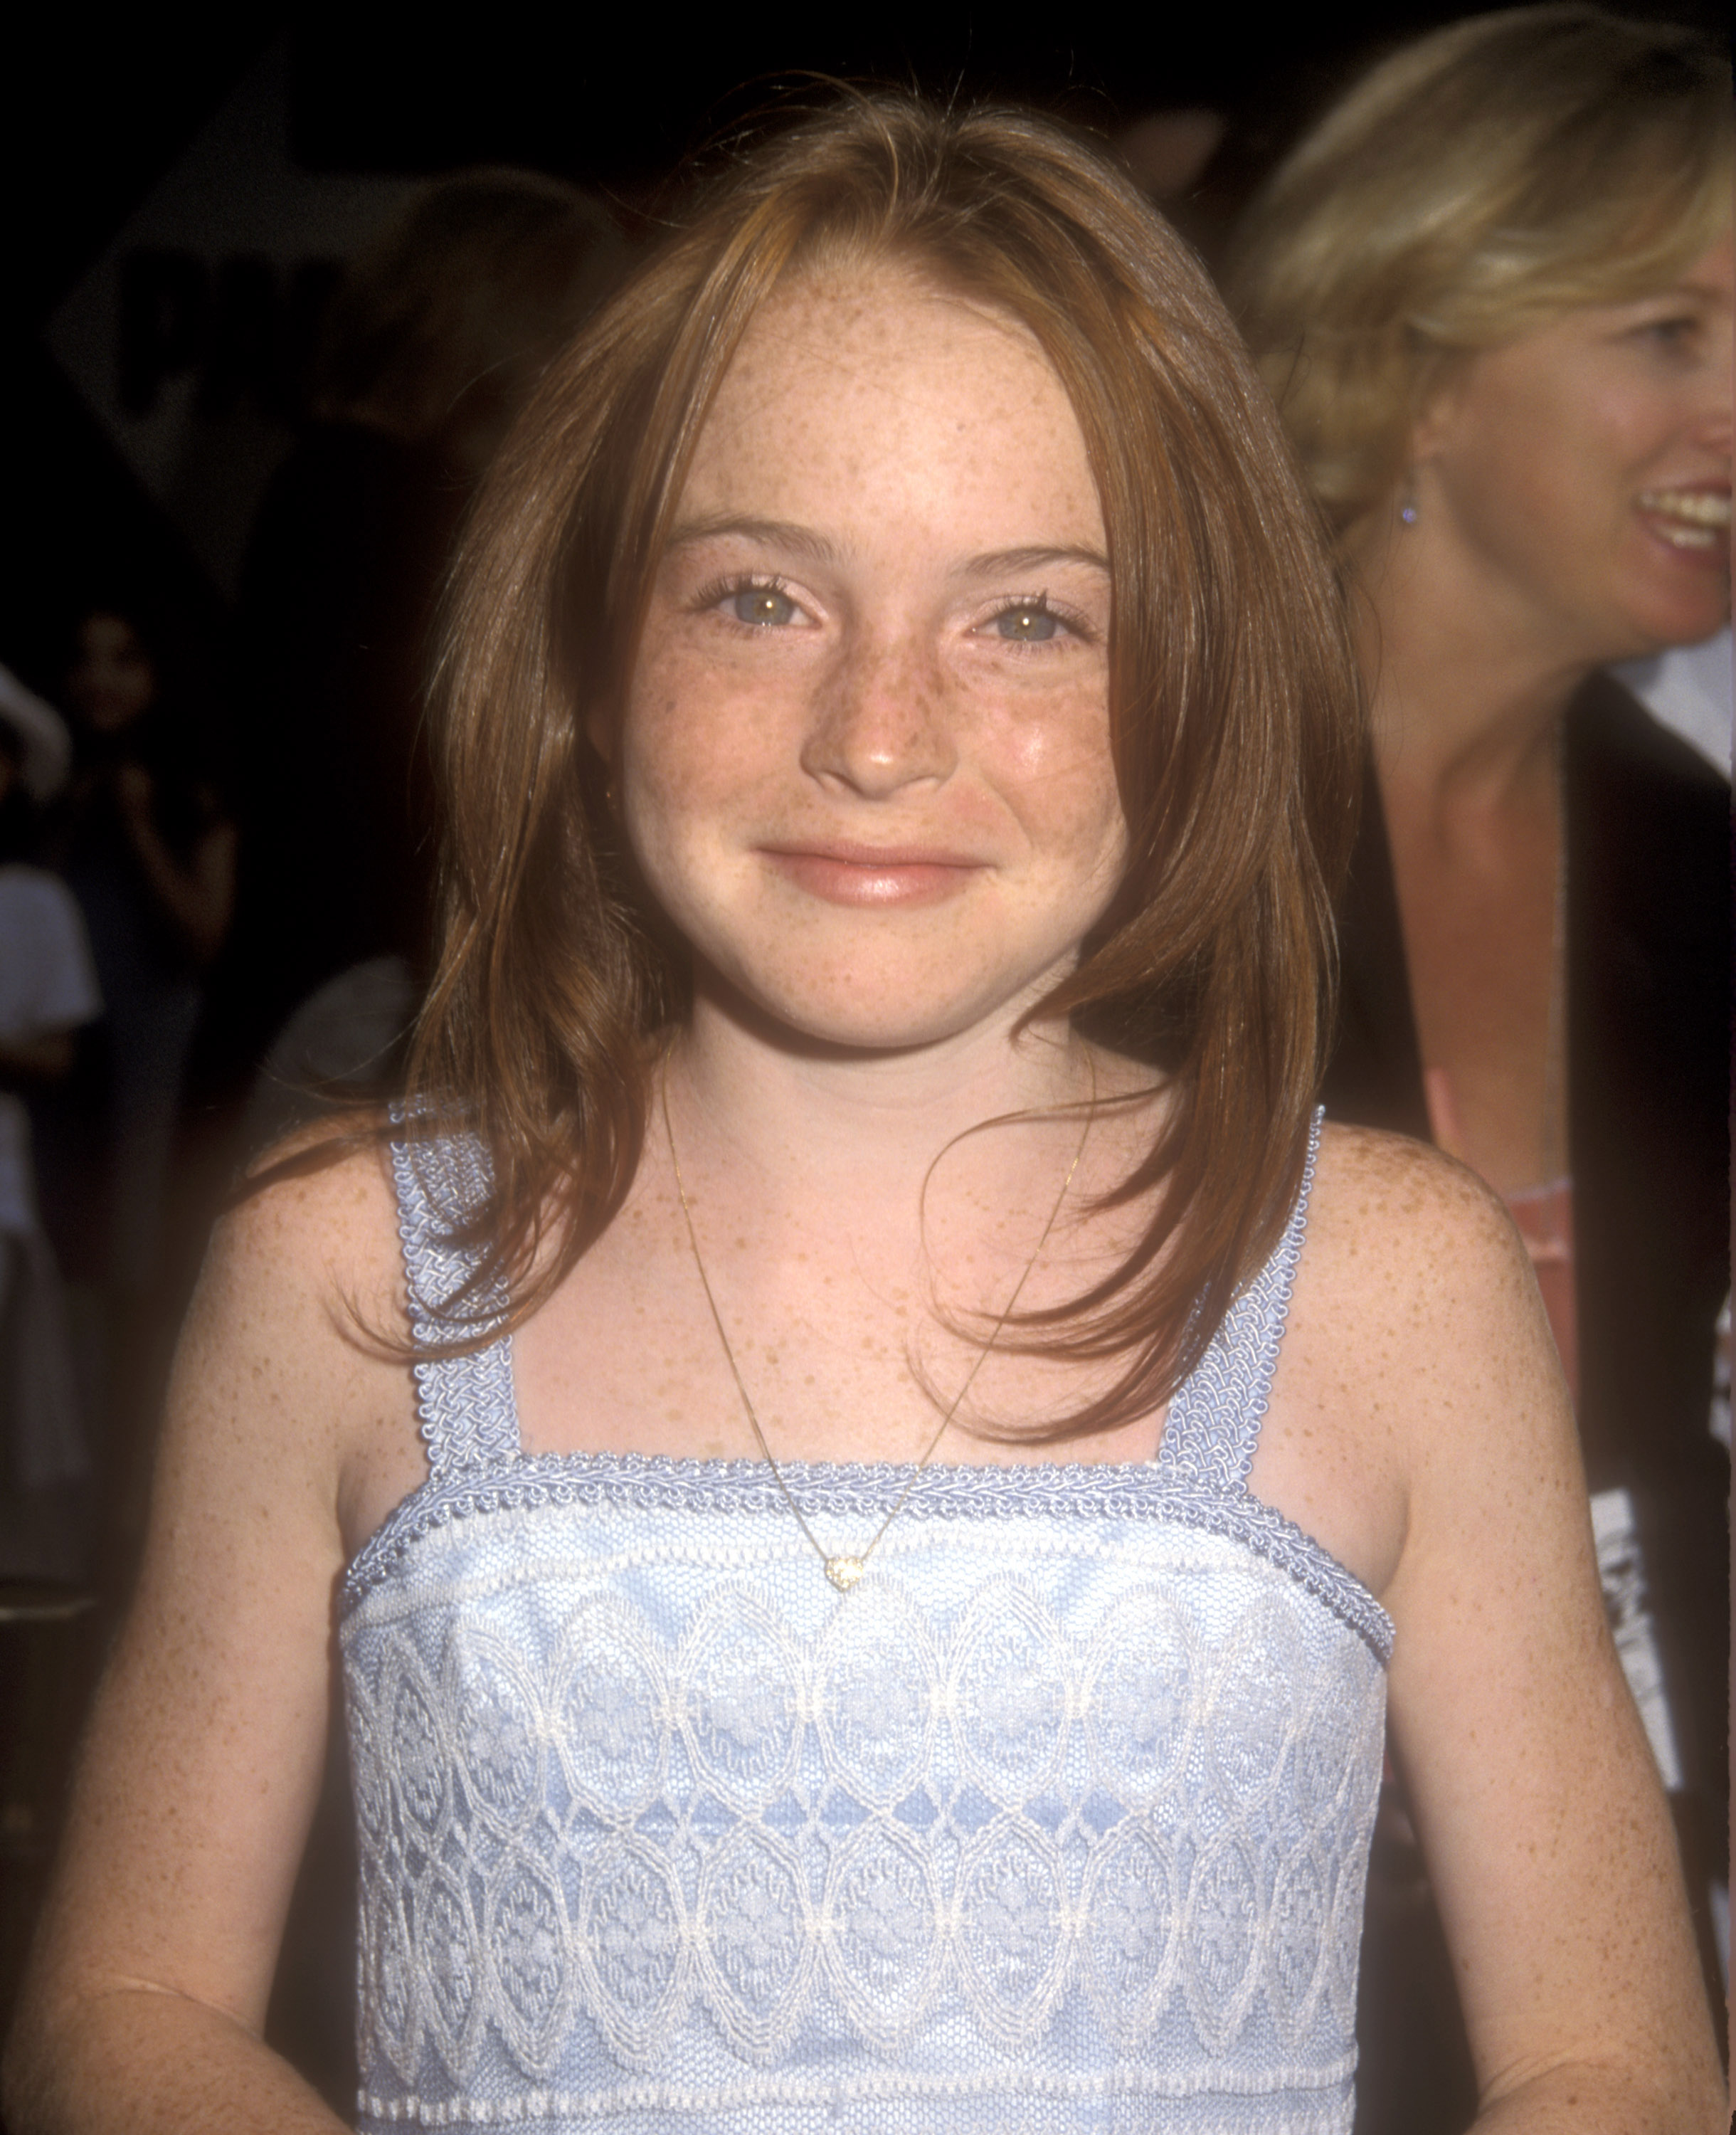 Lindsay Lohan at the Mann National Theatre for "The Parent Trap" Los Angeles premiere in Westwood, California, on July 2, 1998 | Source: Getty Images